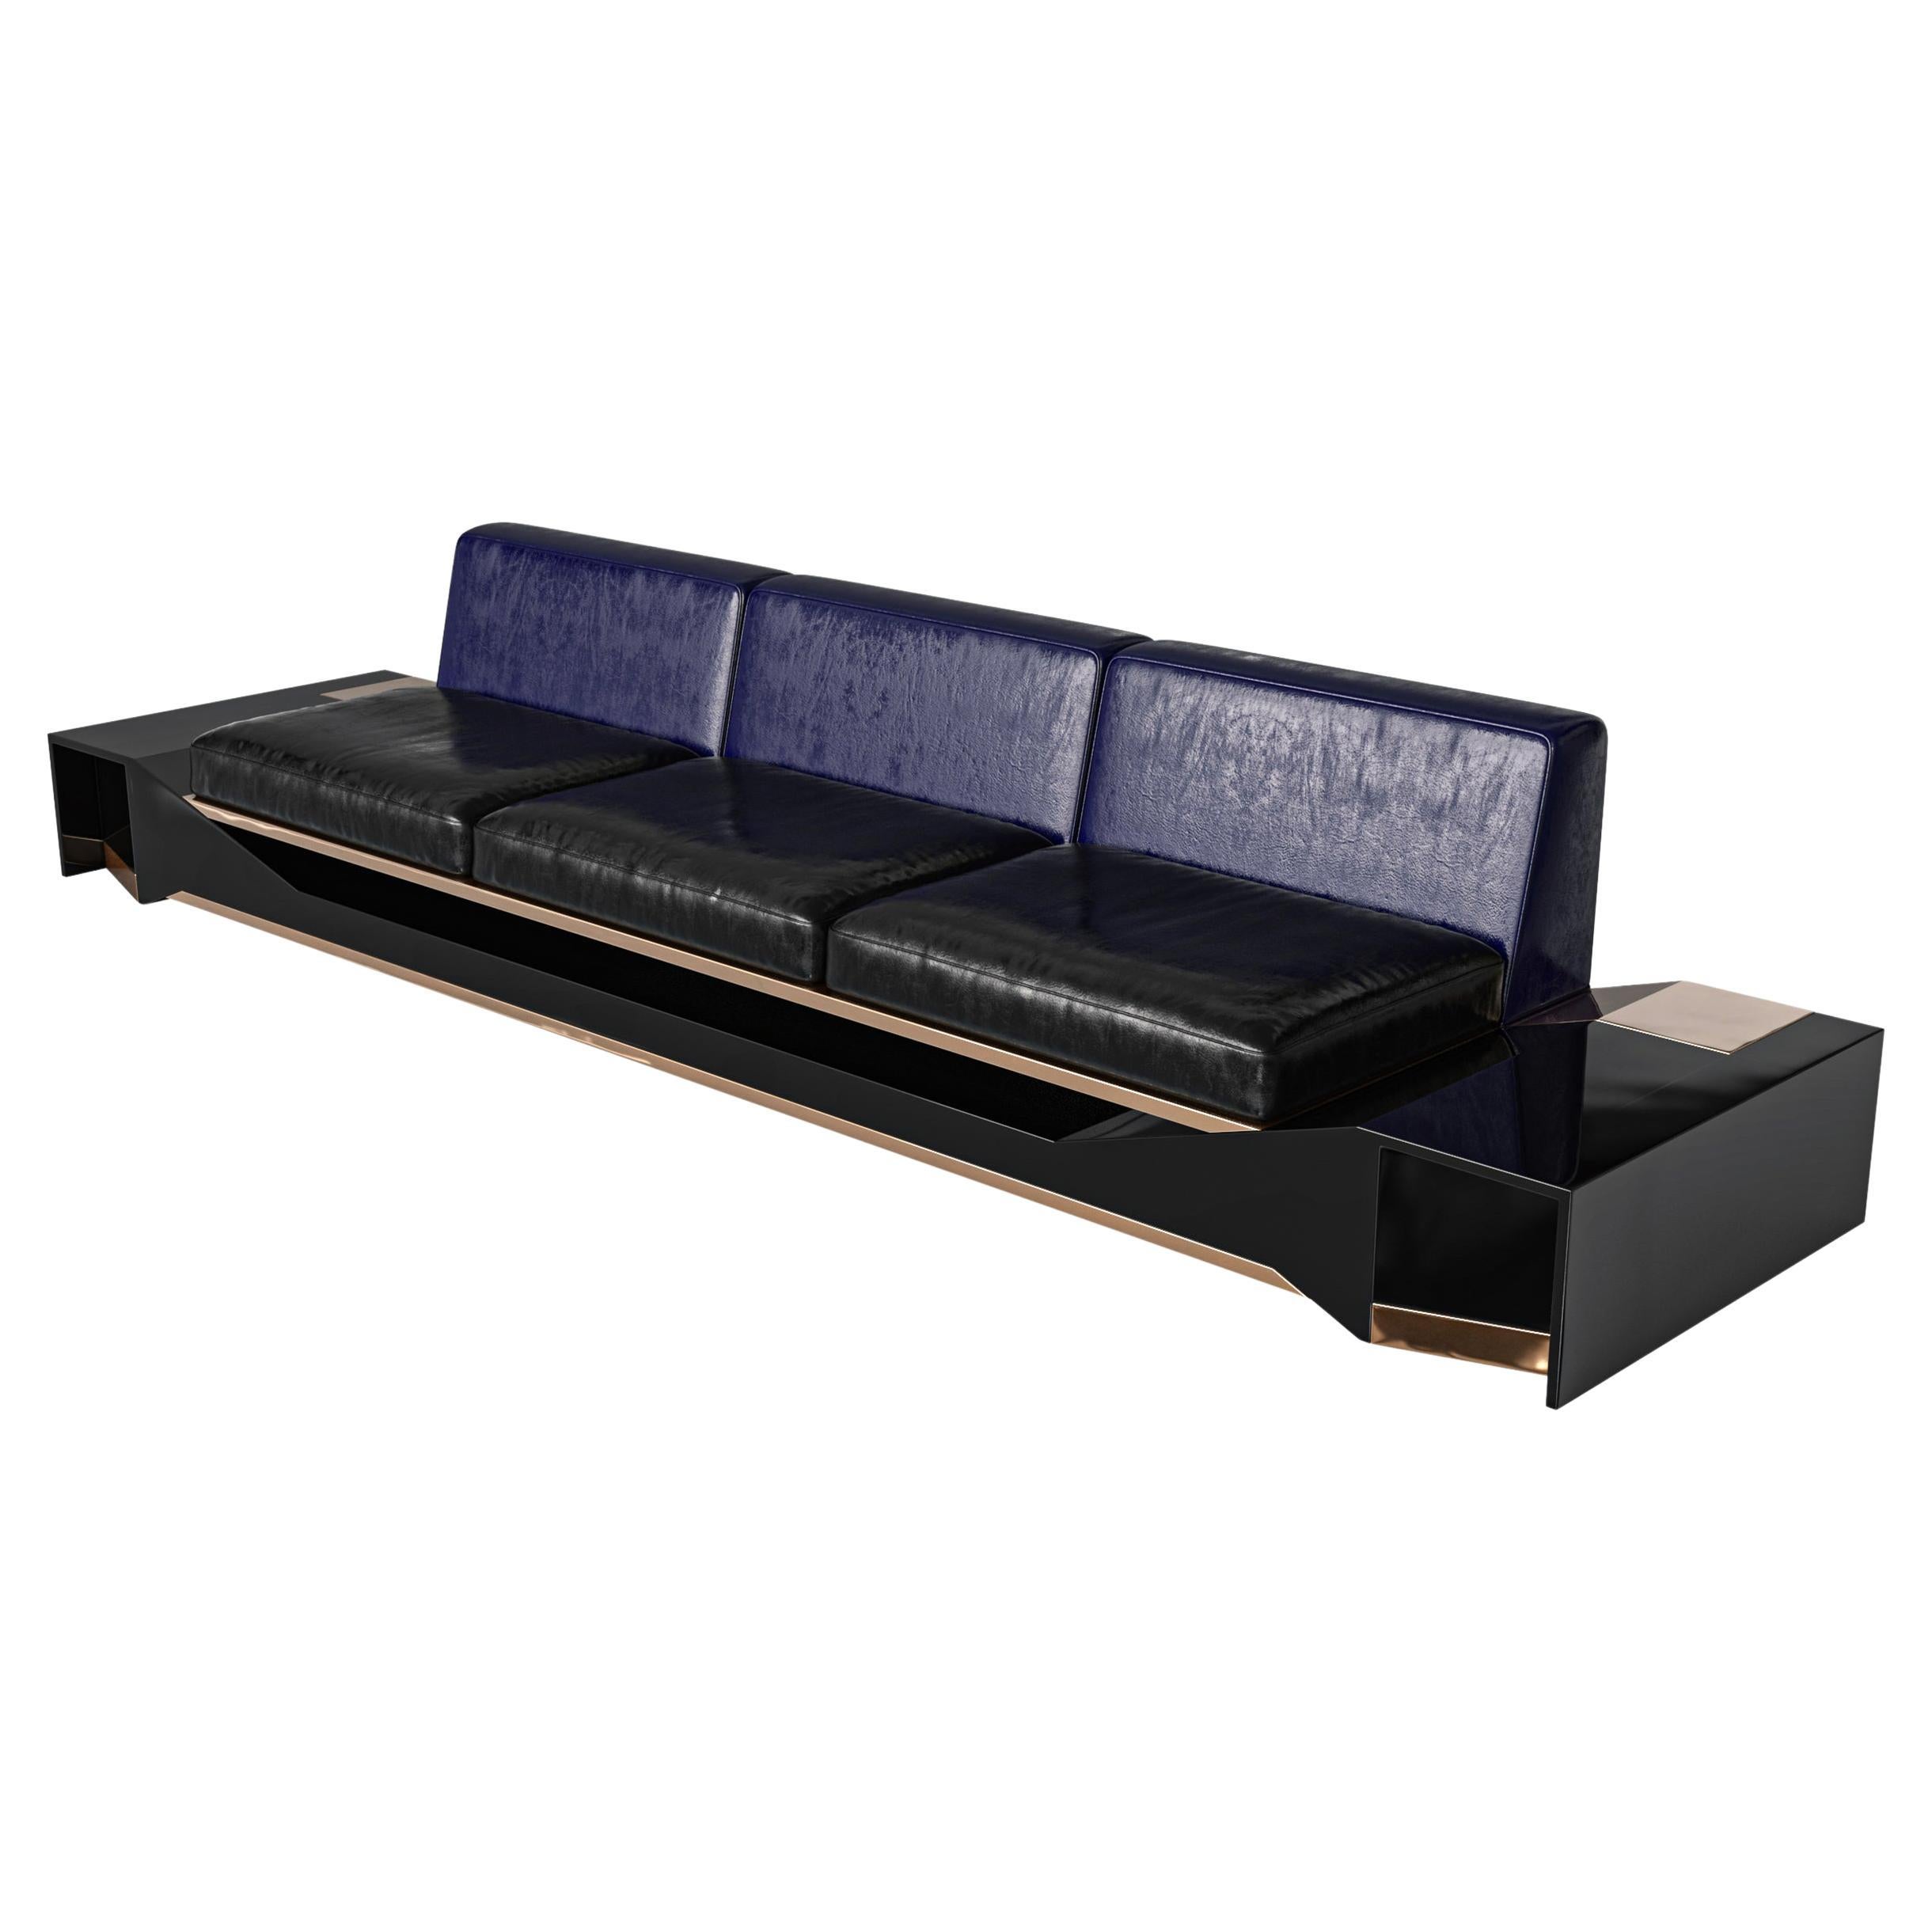 "Castel Madama" Sofa with Stainless Steel and Bronze Details, Istanbul For Sale